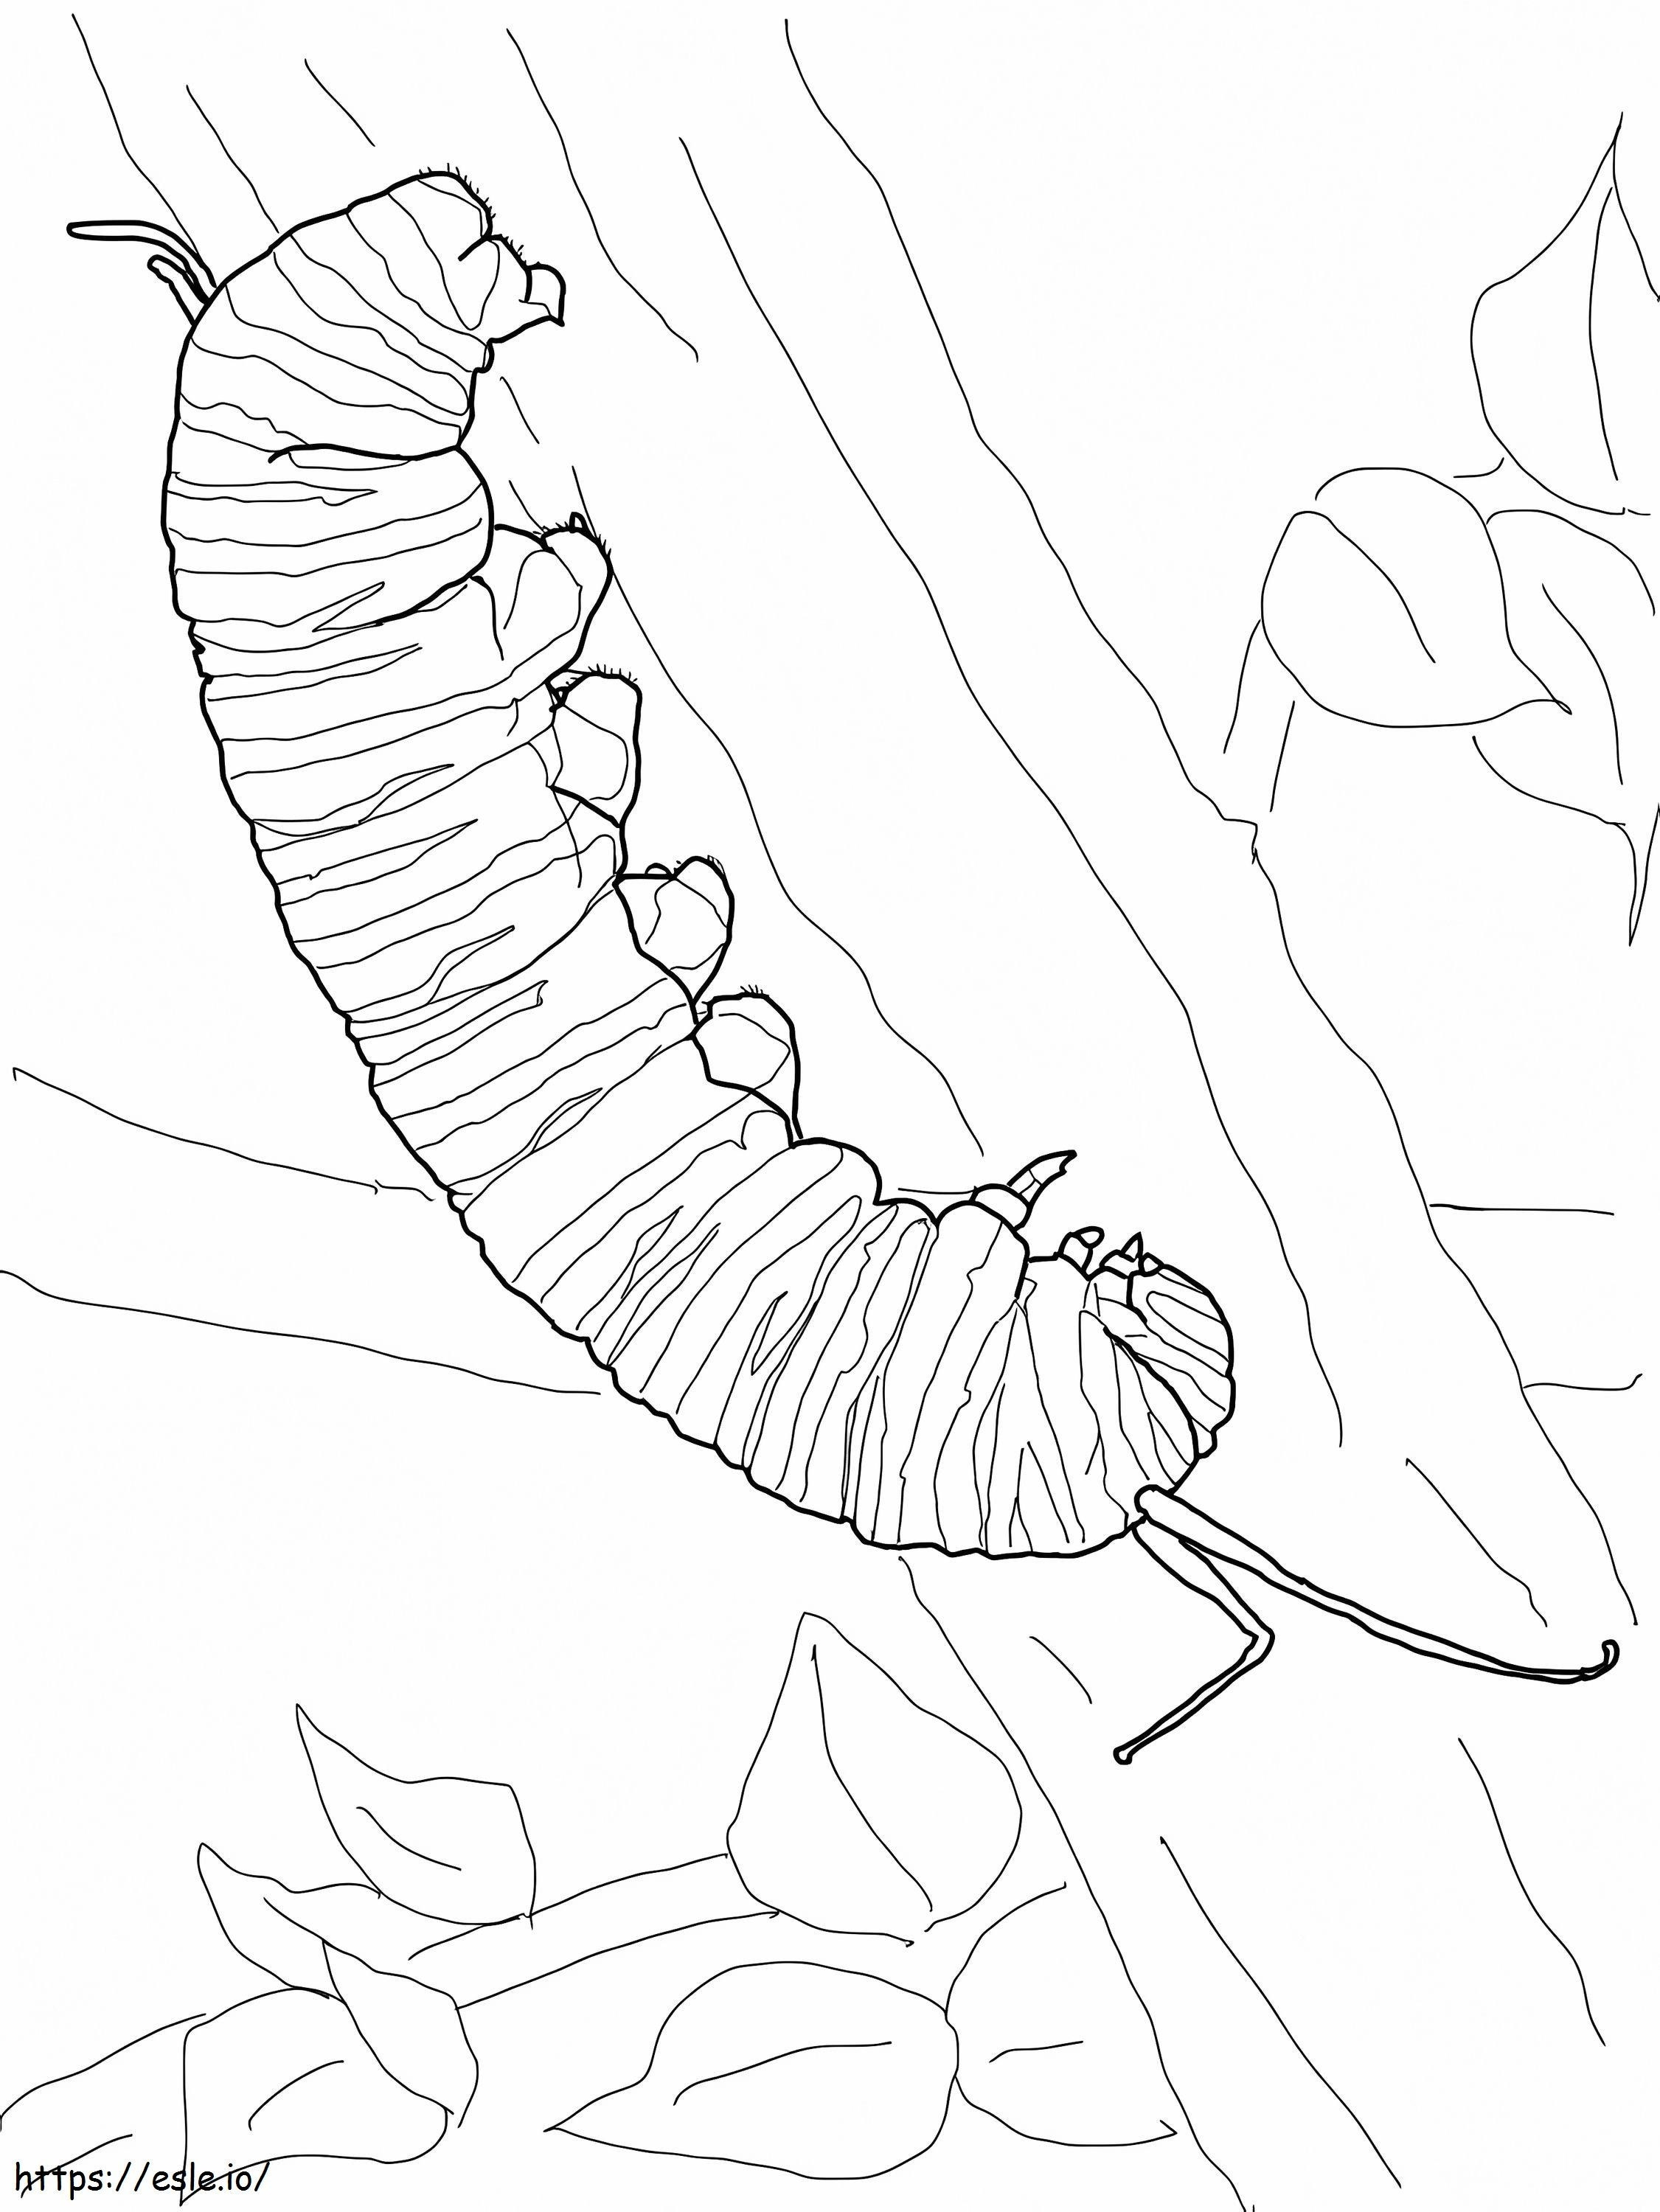 Ewwwg coloring page